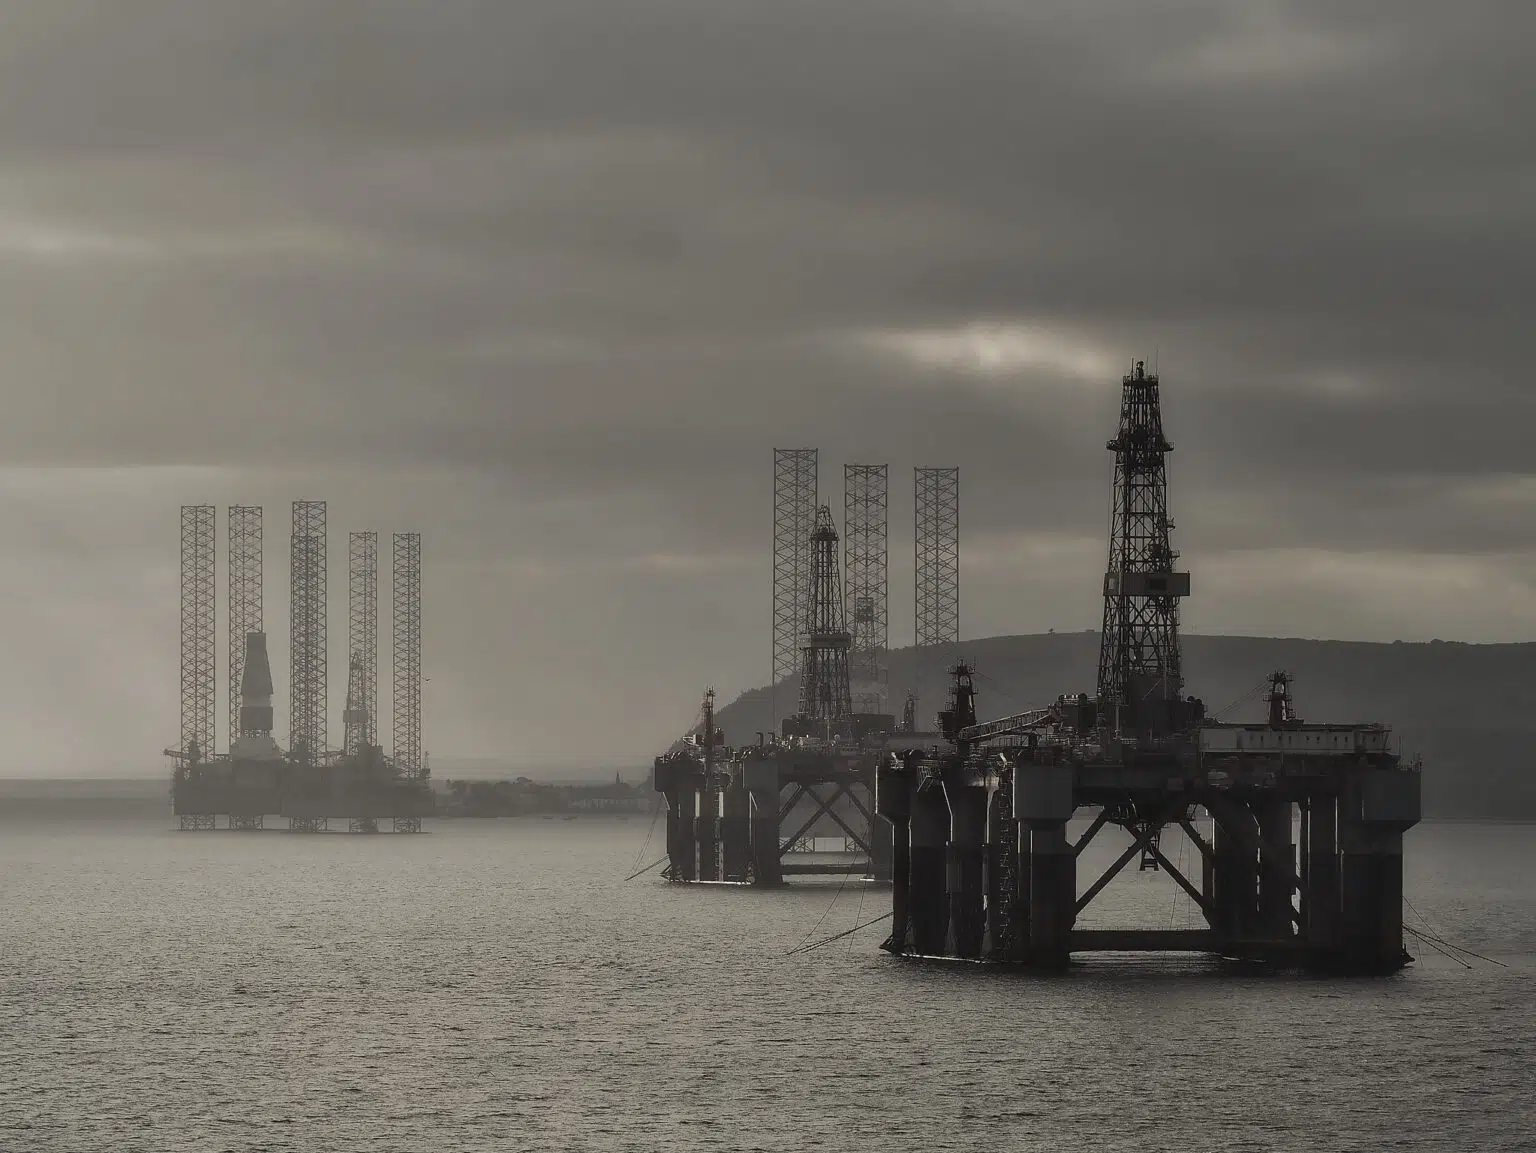 North Sea oil rigs in Cromarty Firth, Scotland. Credit: joiseyshowaa (CC BY-SA 2.0)